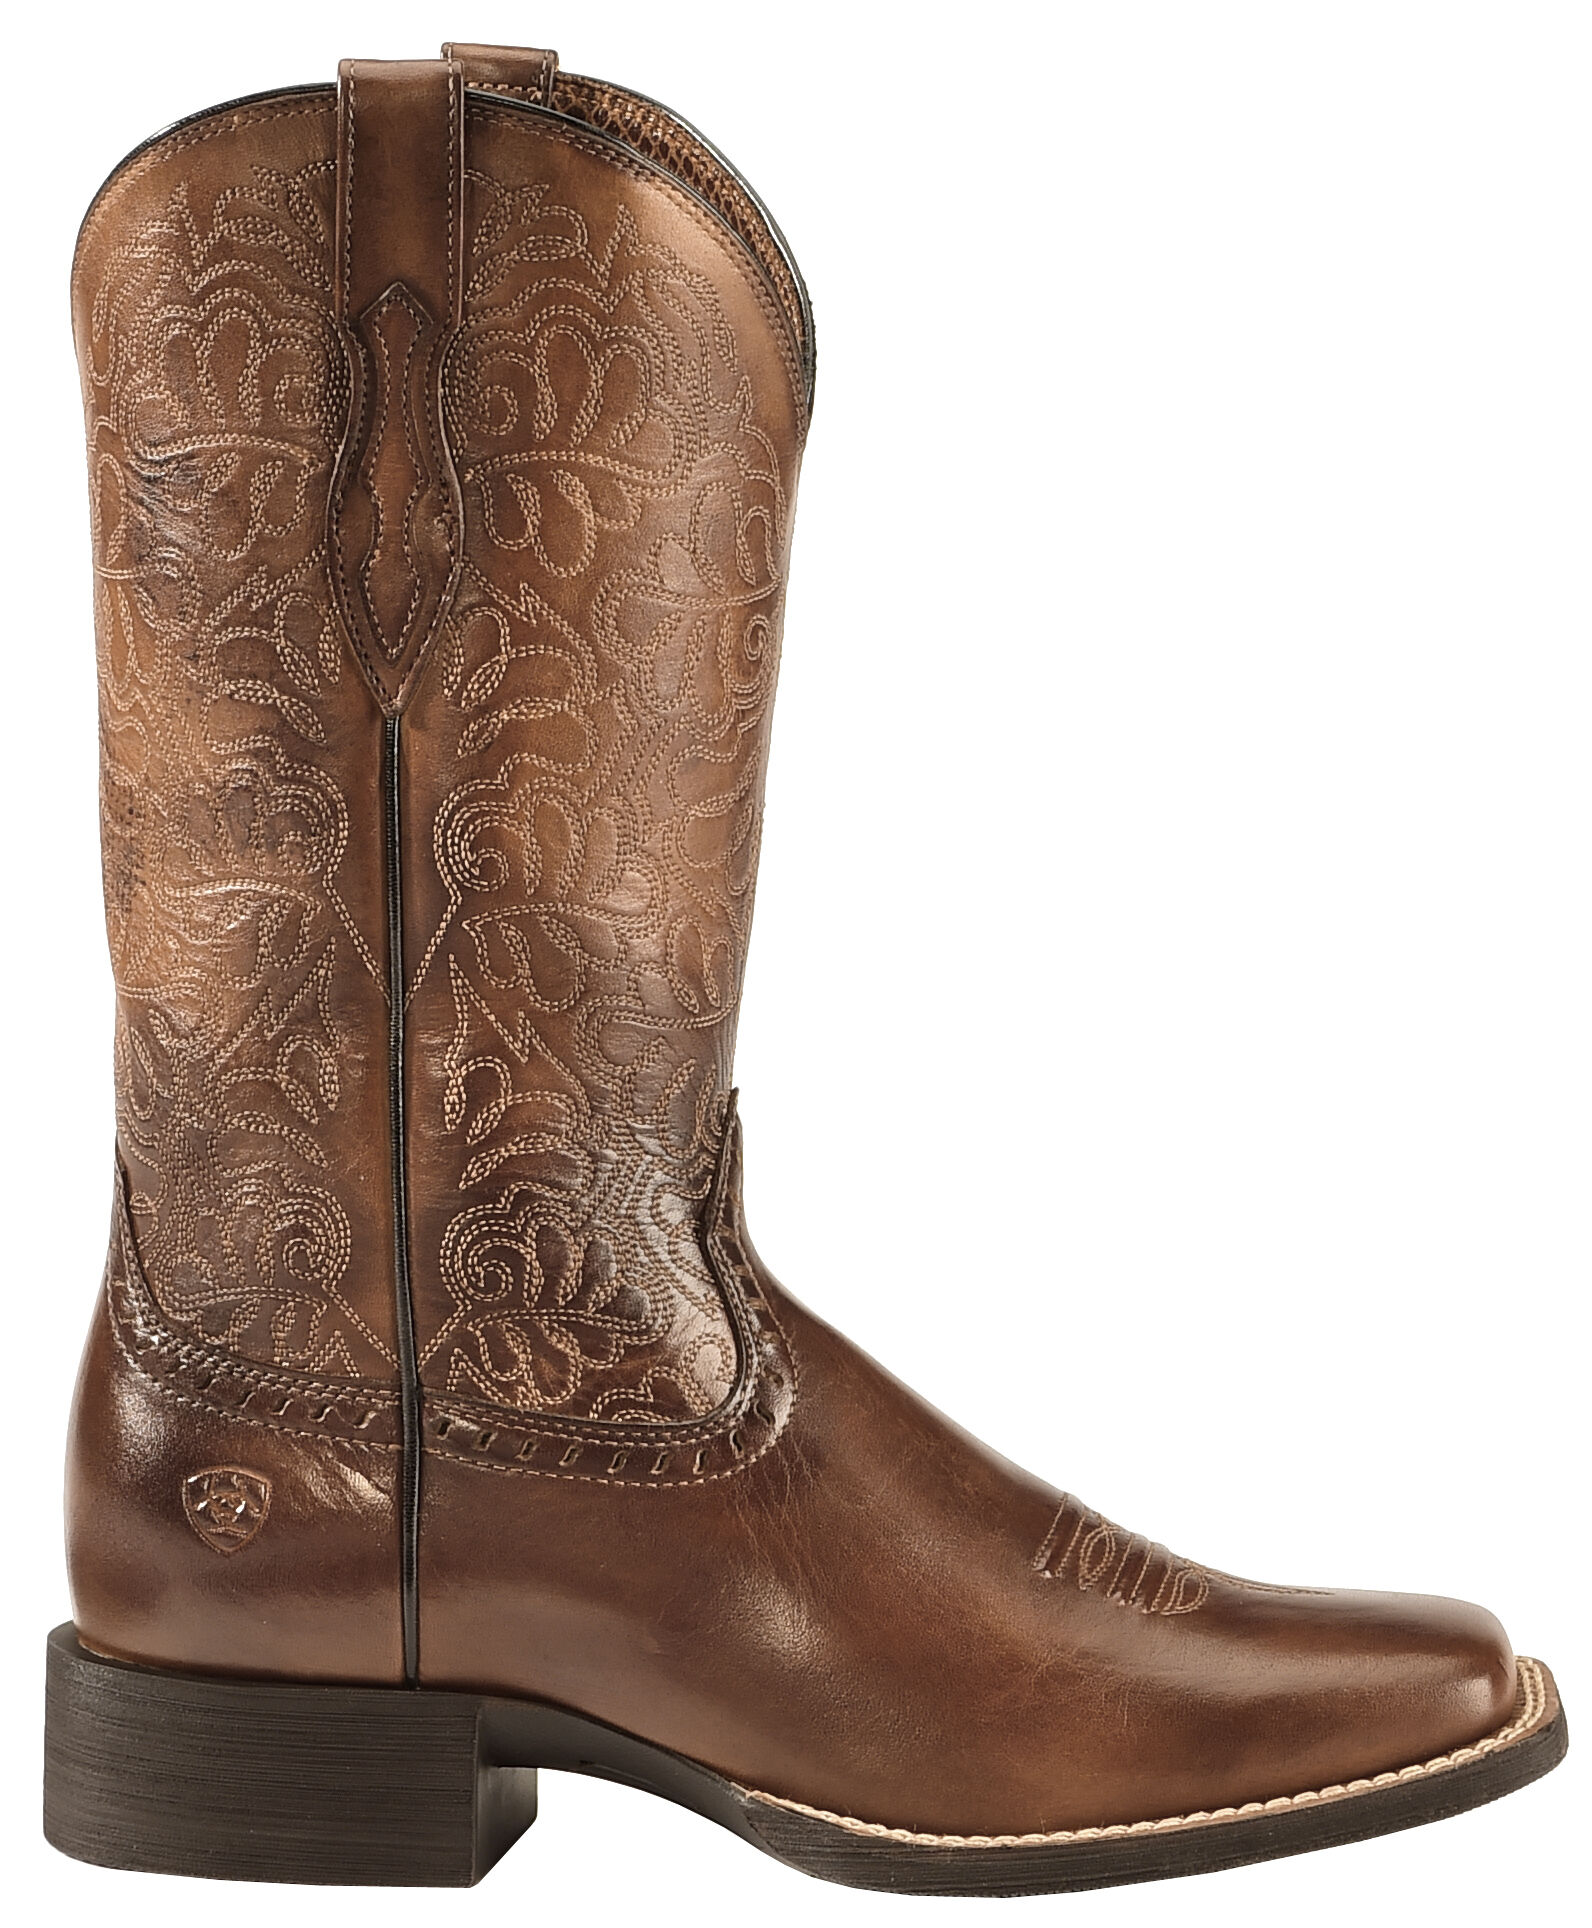 Details about   10019907 Ariat Women's Round Up Remuda Western Cowgirl Boots NEW 